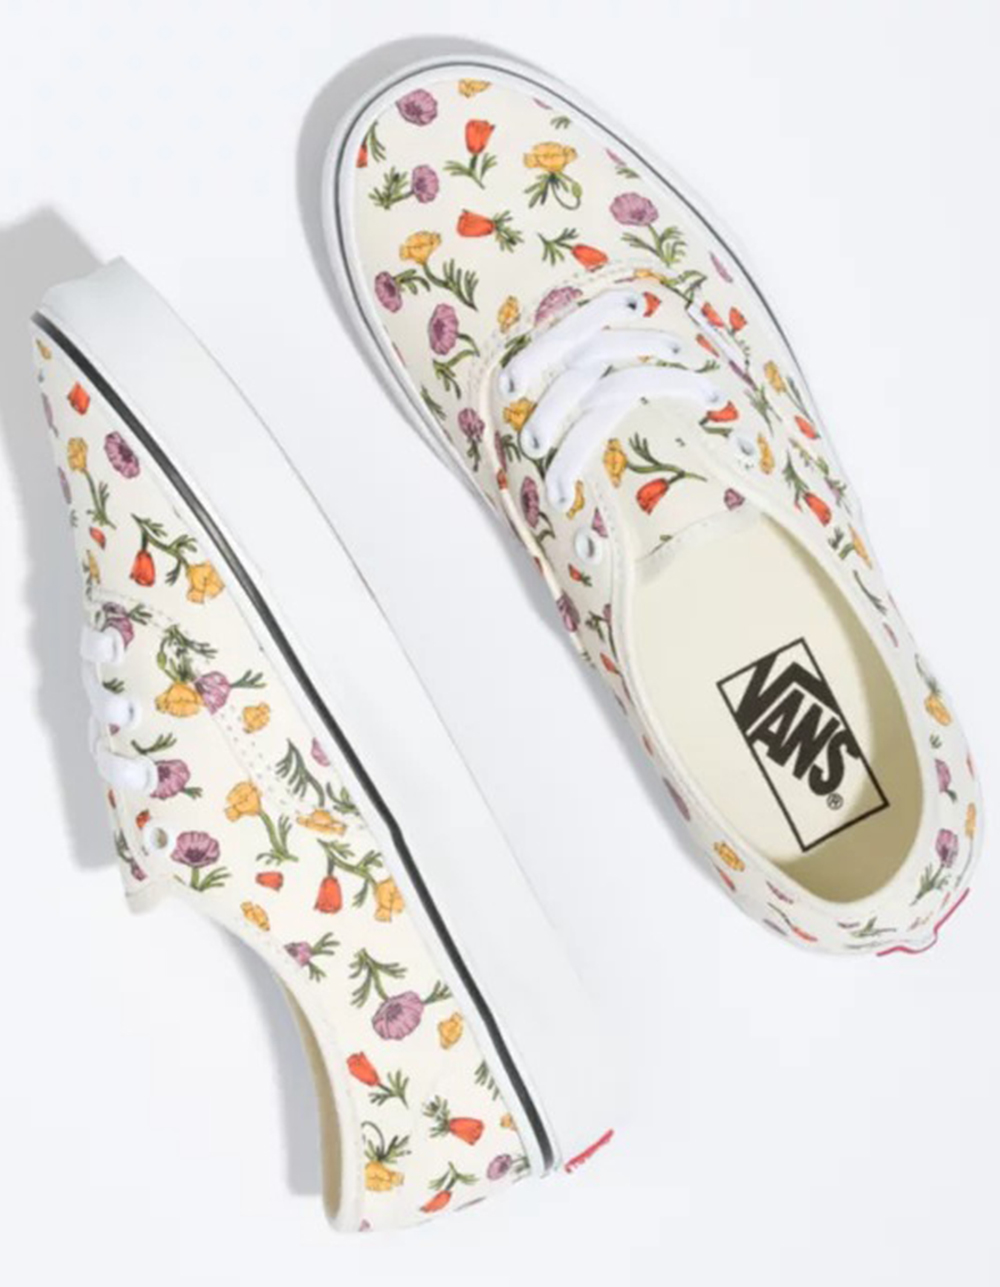 VANS Authentic Womens Shoes - WHITE COMBO | Tillys